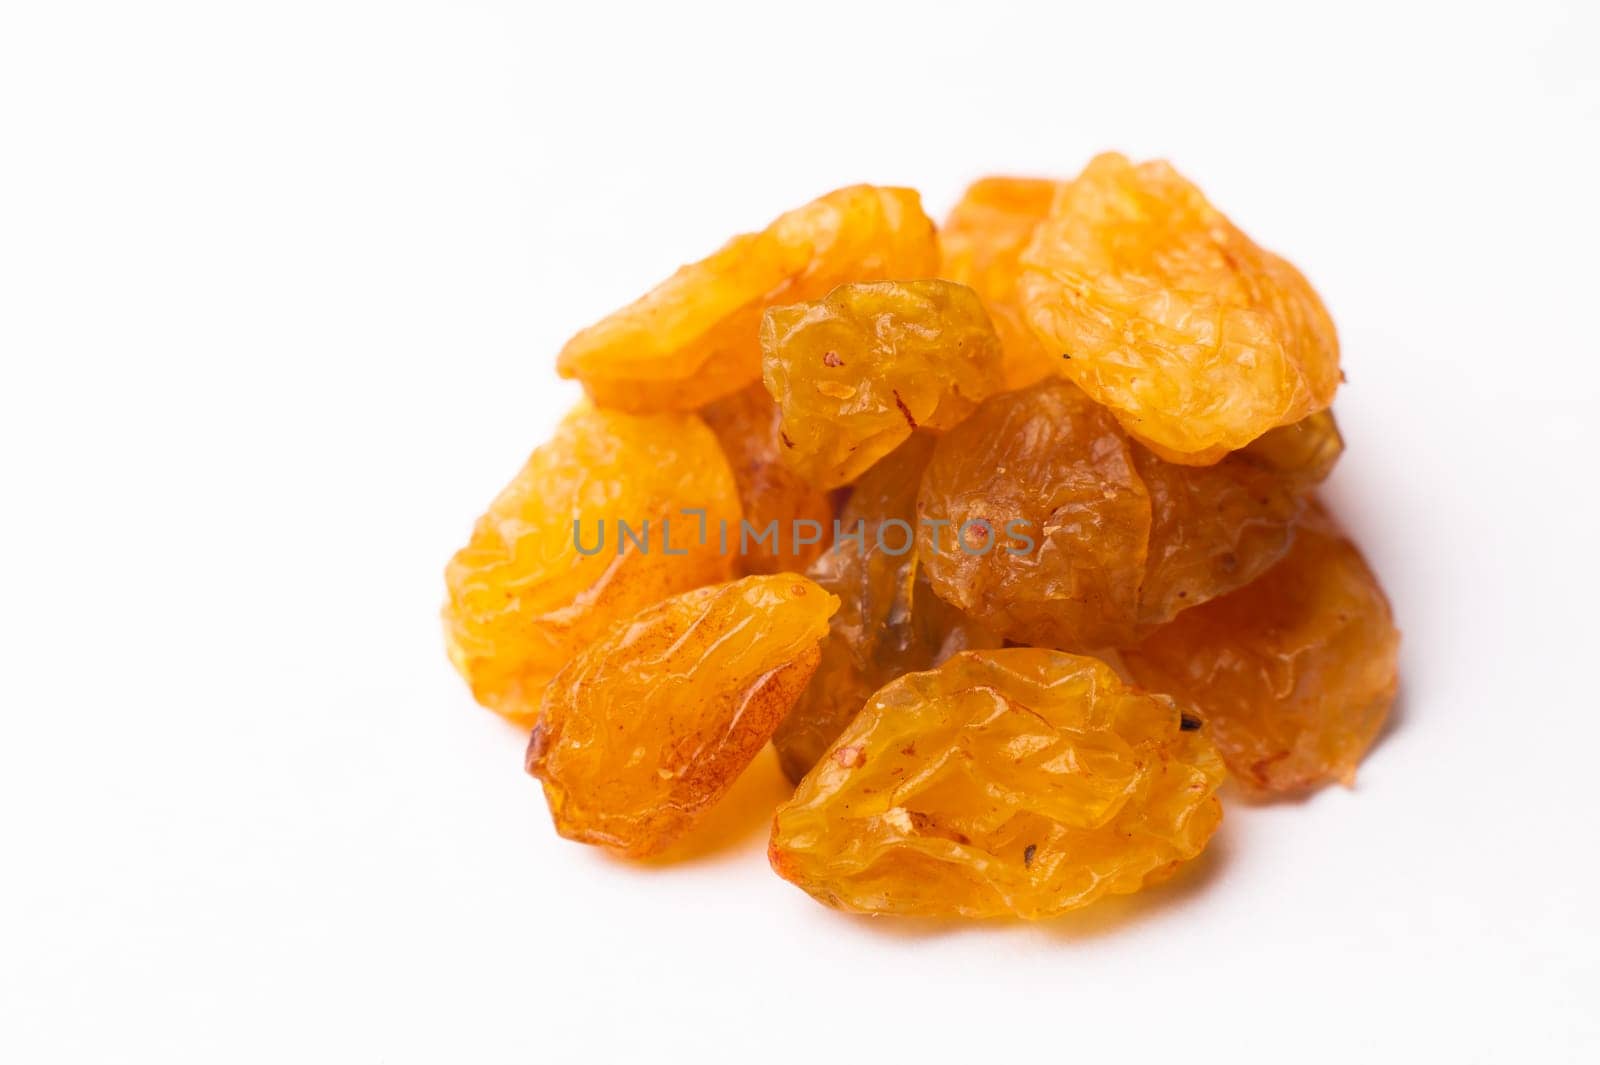 Raisins lie in a pile on a white background, close-up of the texture of the raisins, macro shot by yanik88